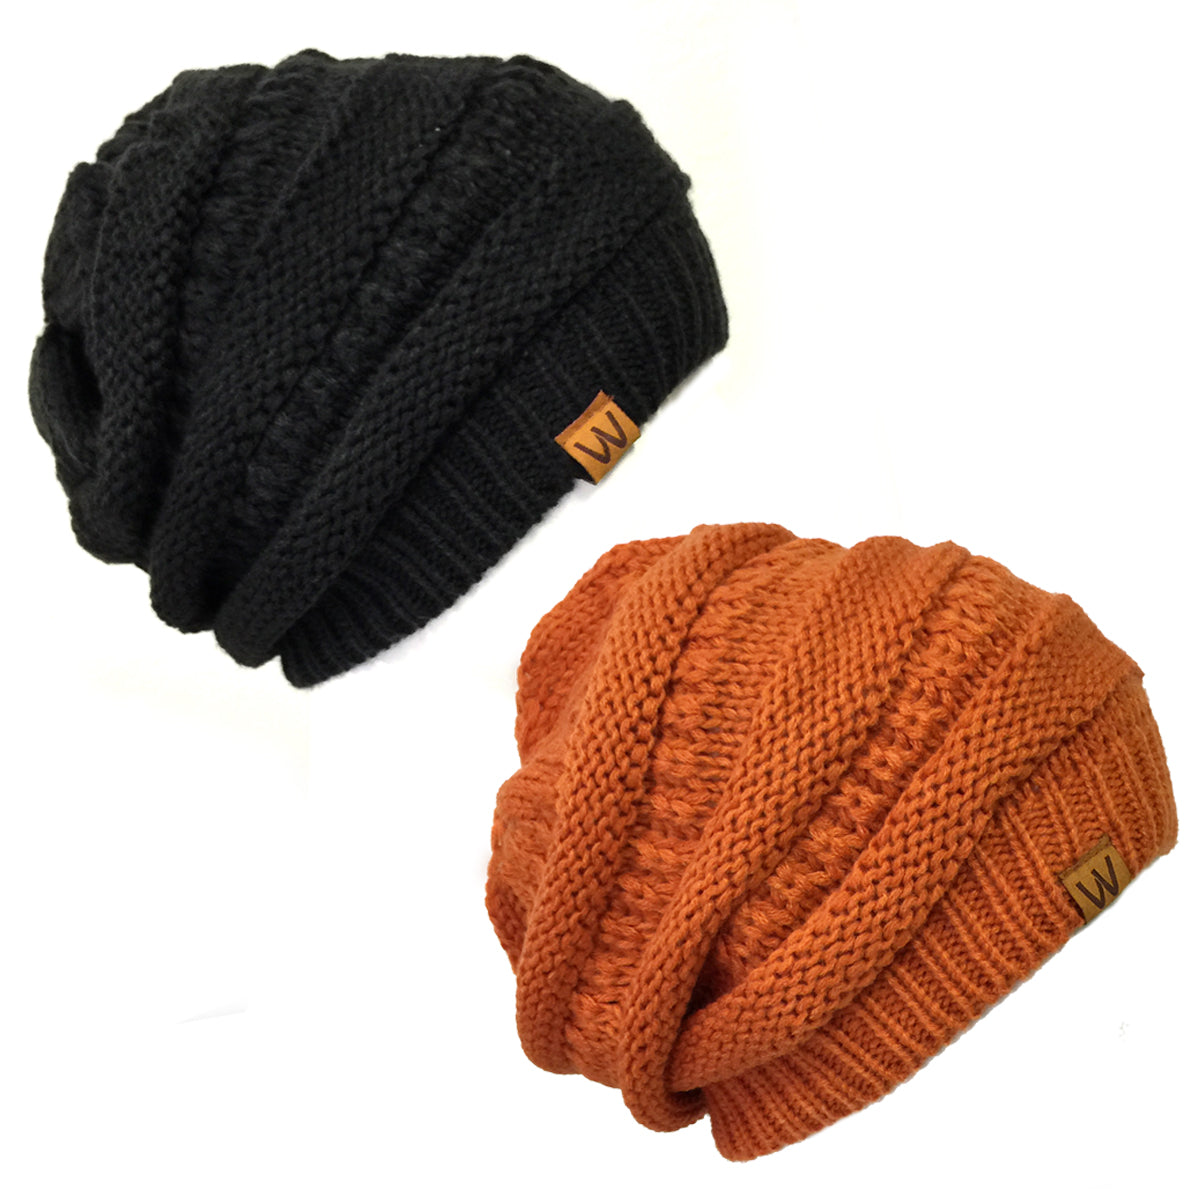 Wrapables Slouchy Winter Beanie Cap Hat Set of 2